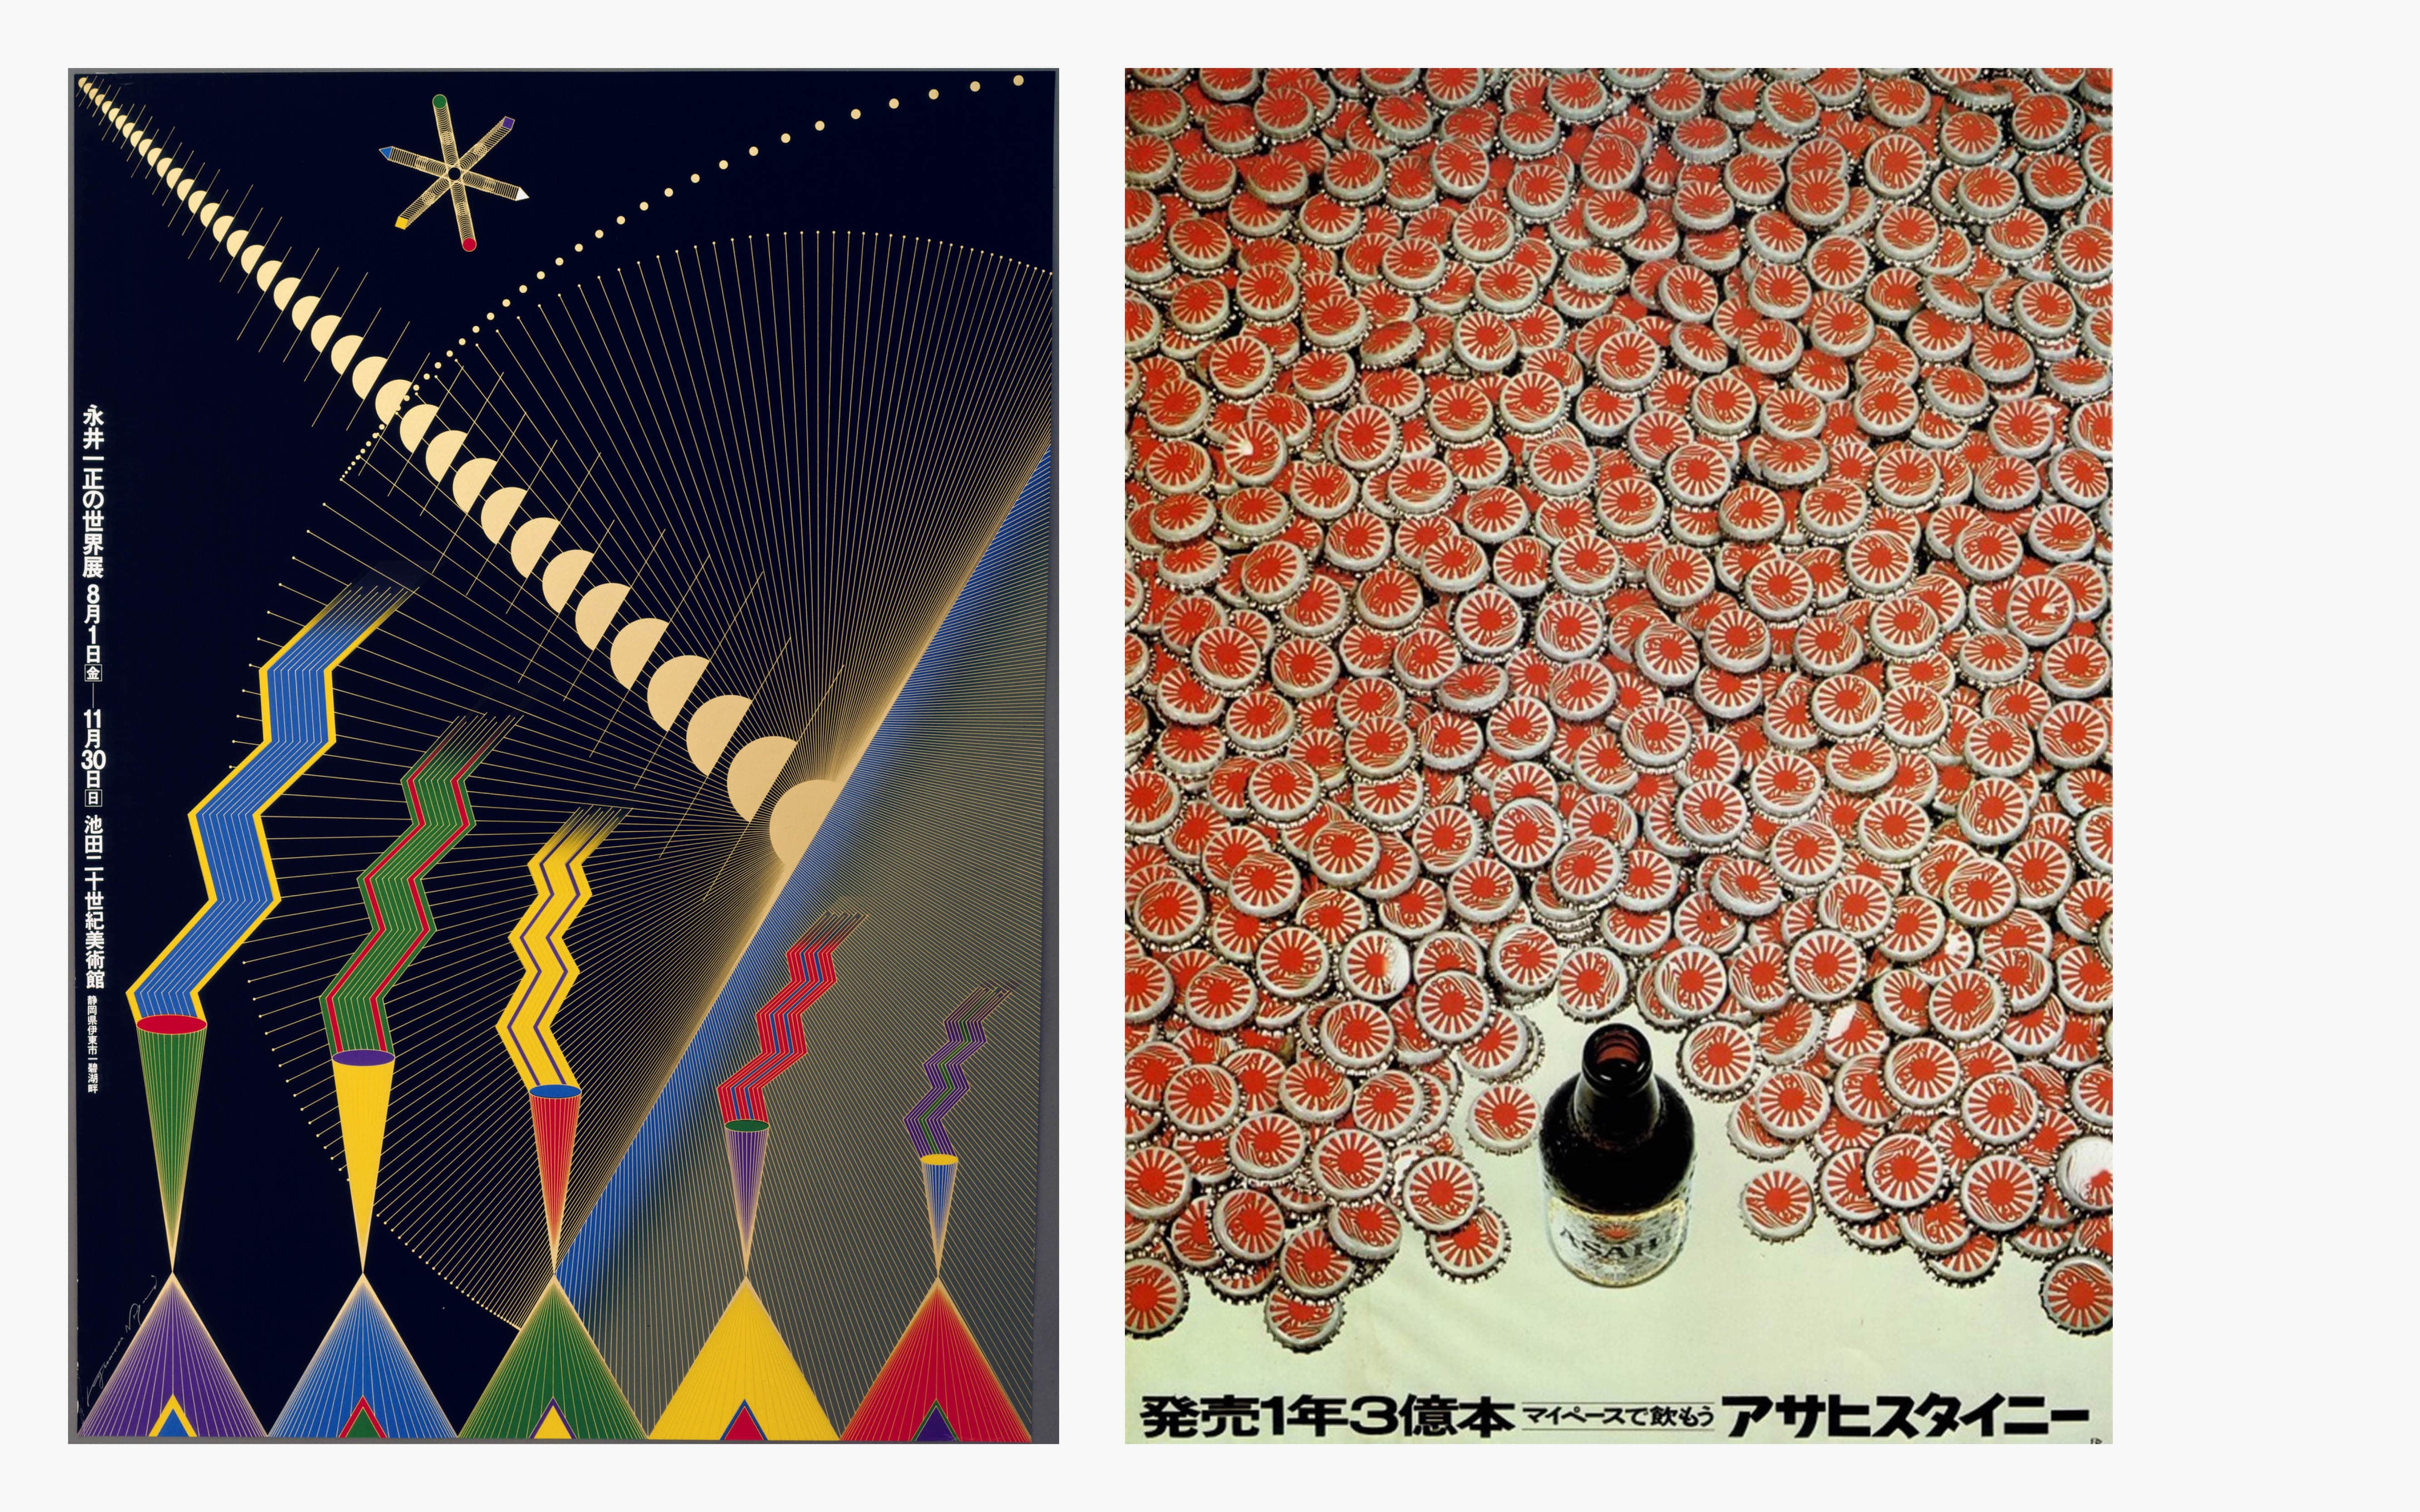 Kazumasa Nagai poster style evolved during all his life, from his Kamekura early influence to a personal and vivid style, mixing photography, drawing and geometric shapes. See more: MoMa ; Readymag